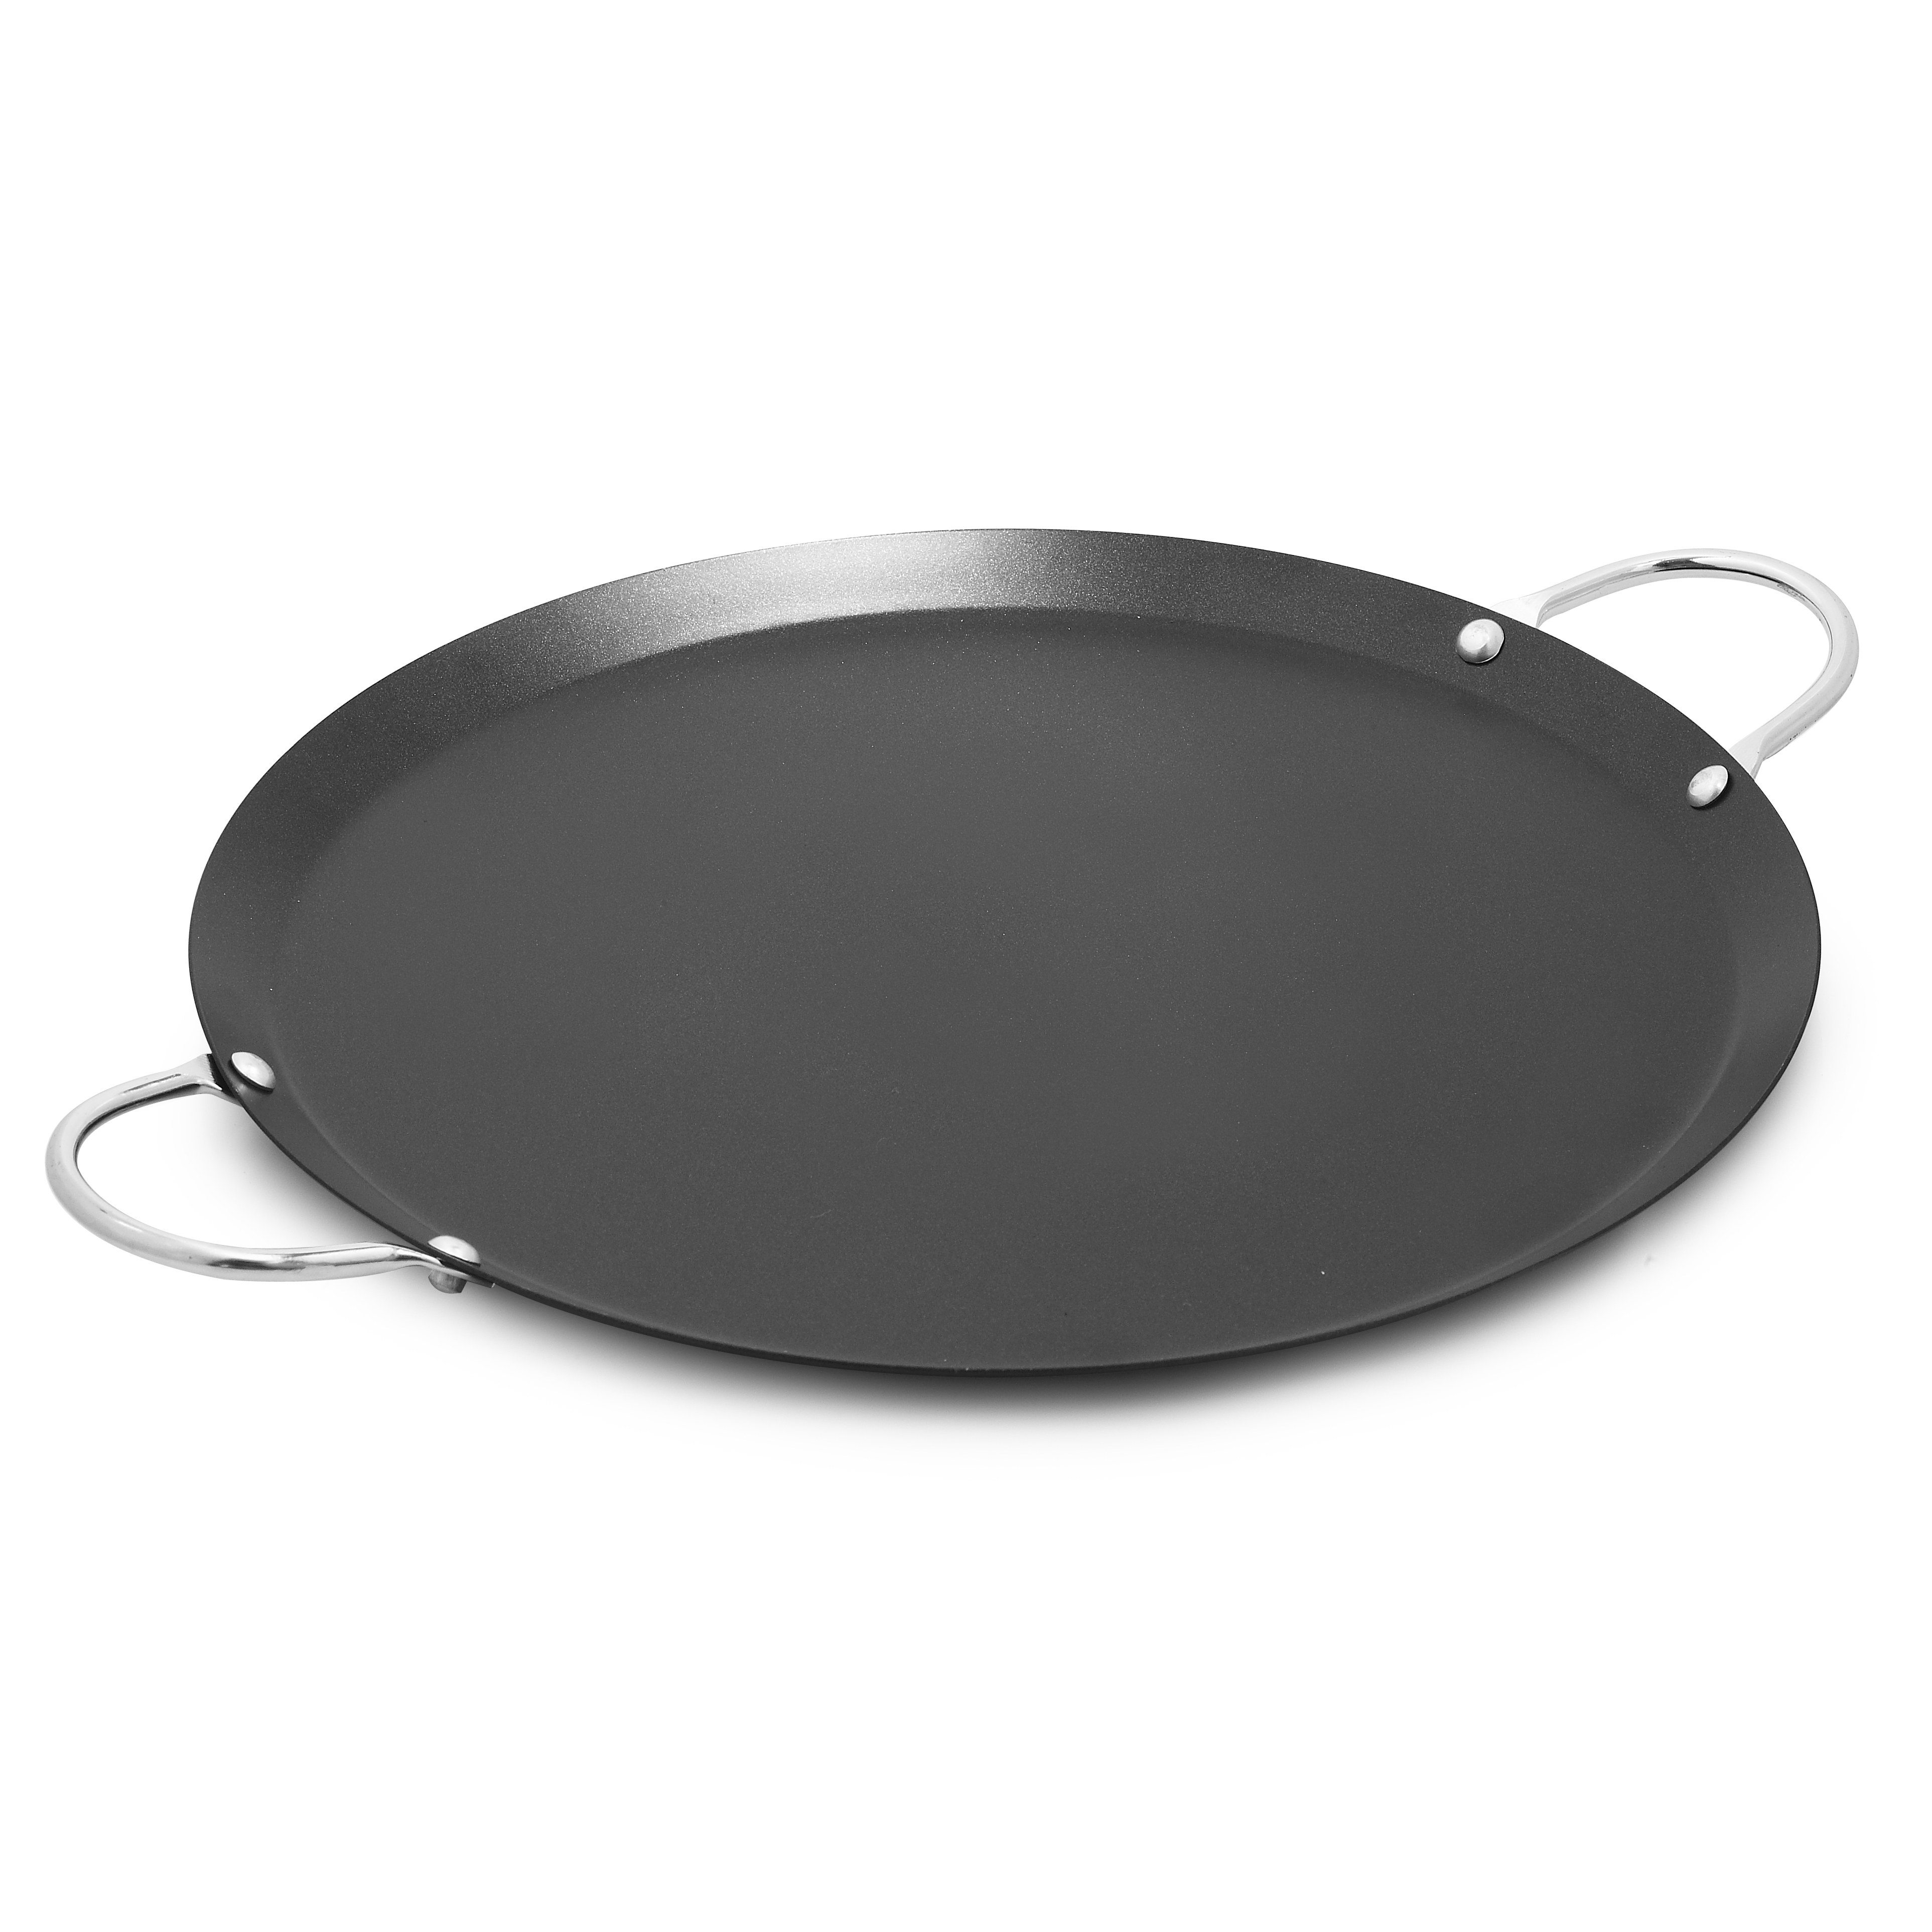 IMUSA IMUSA Round Carbon Steel Comal with Metal Handles 9 Inch 